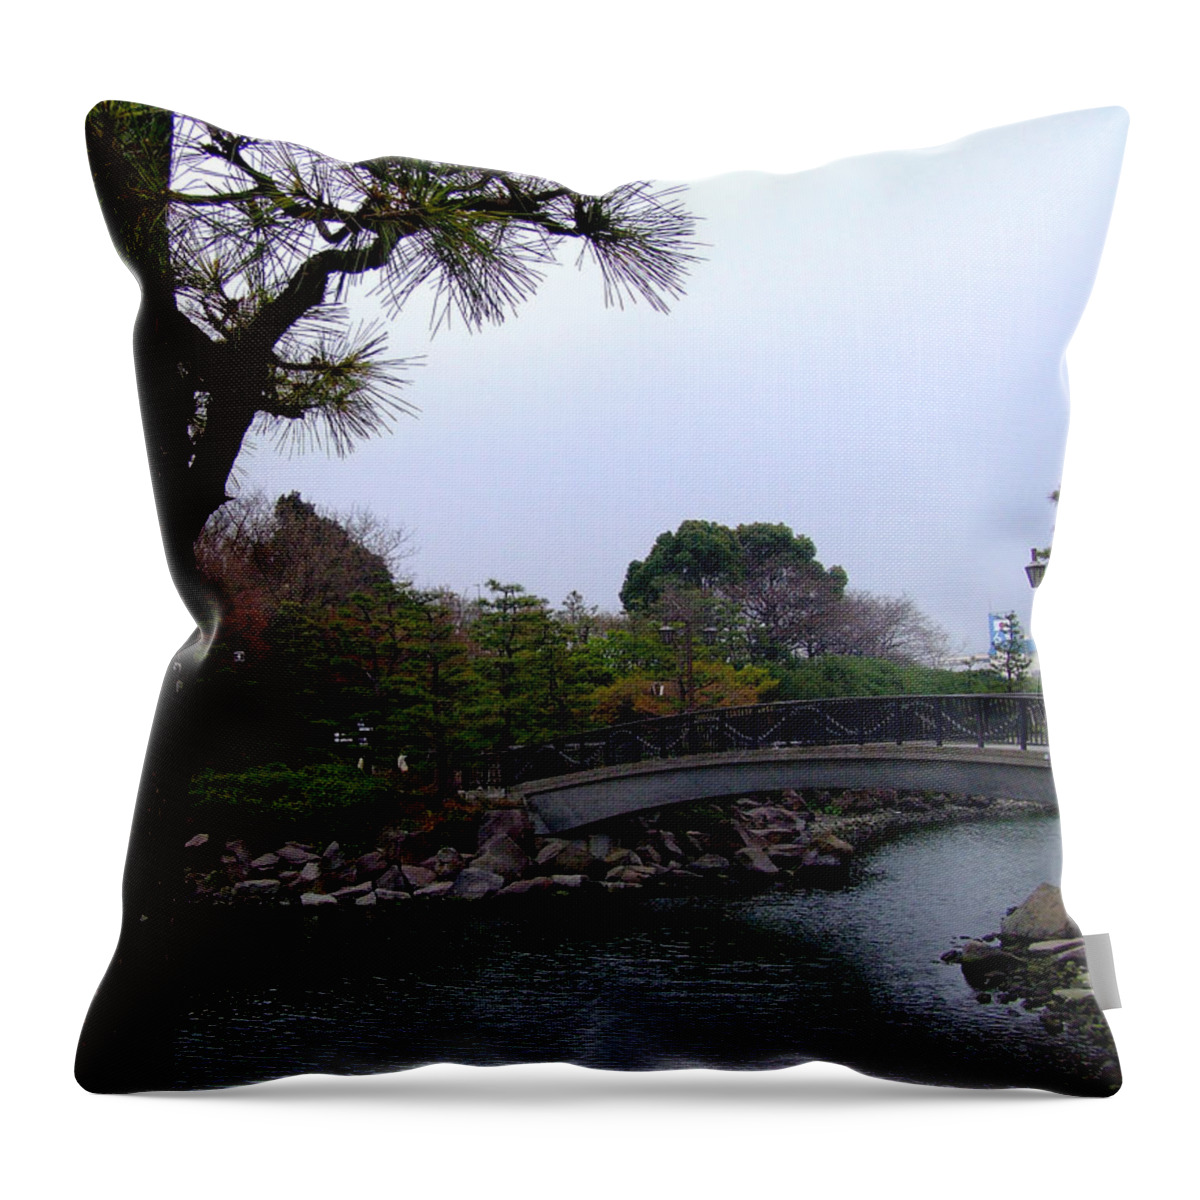 Japan Throw Pillow featuring the photograph Japan by Andrea Anderegg